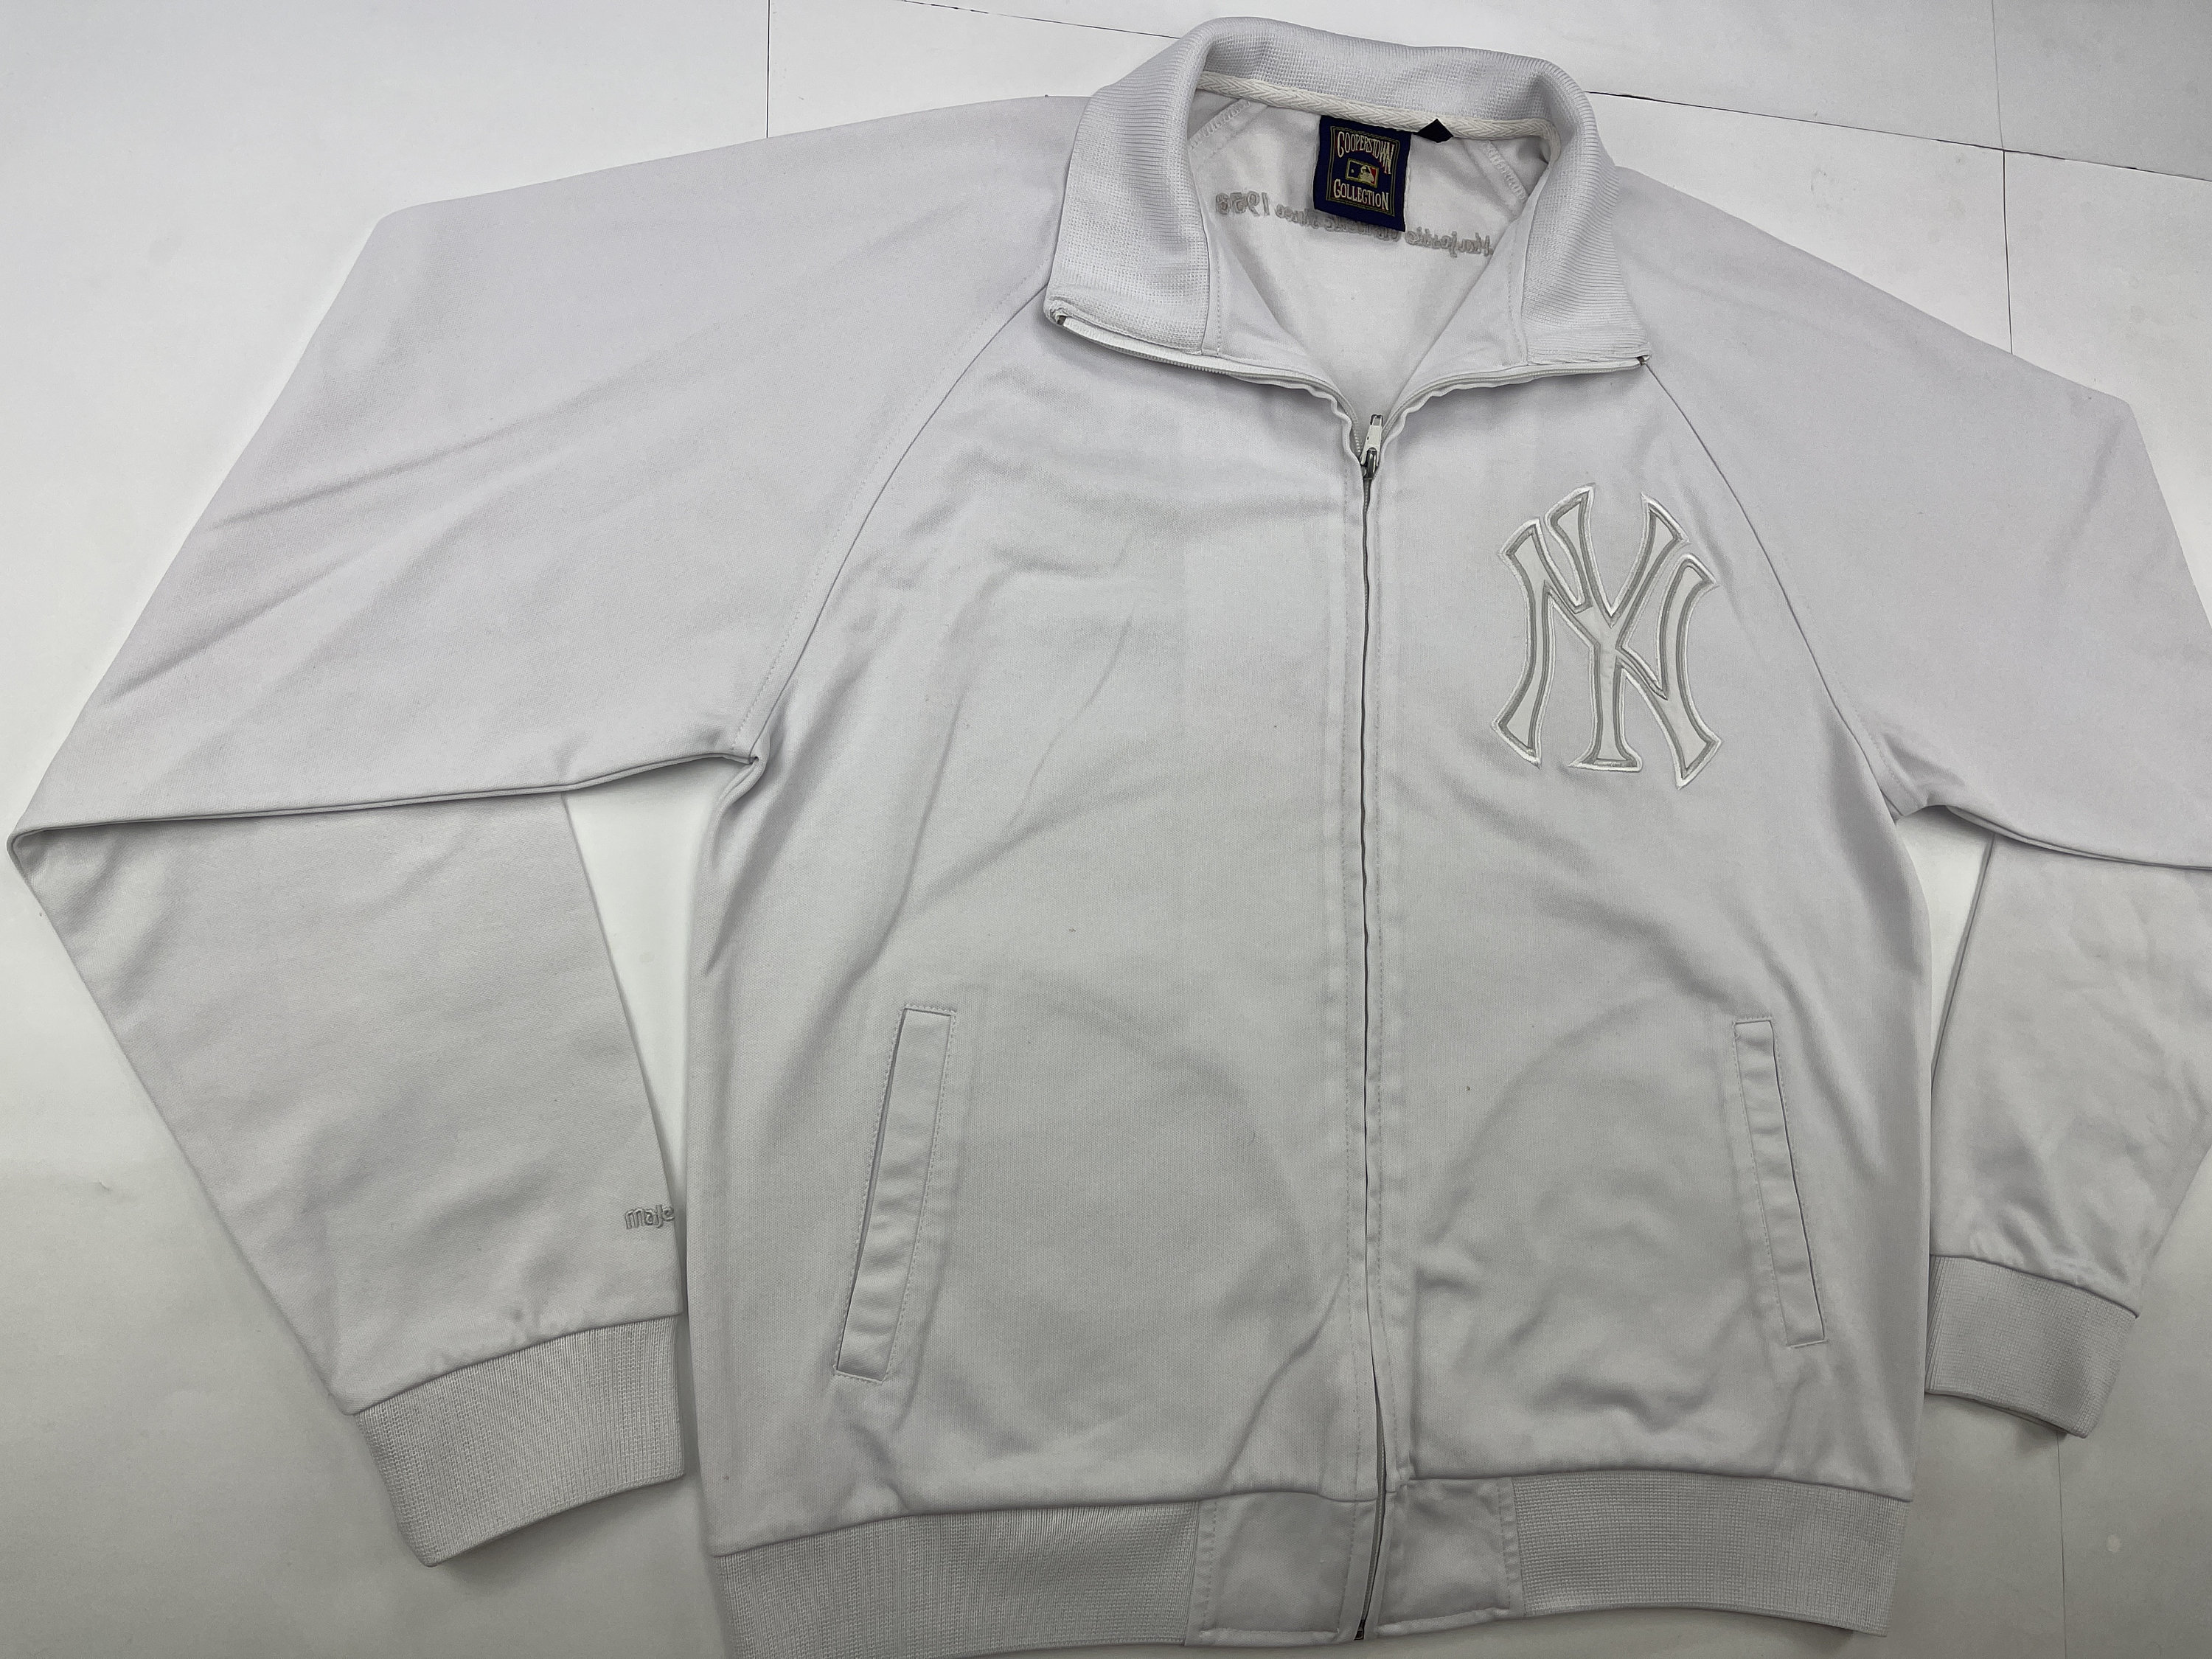 MLB New York Yankees Jacket White Cooperstown Collection | Etsy